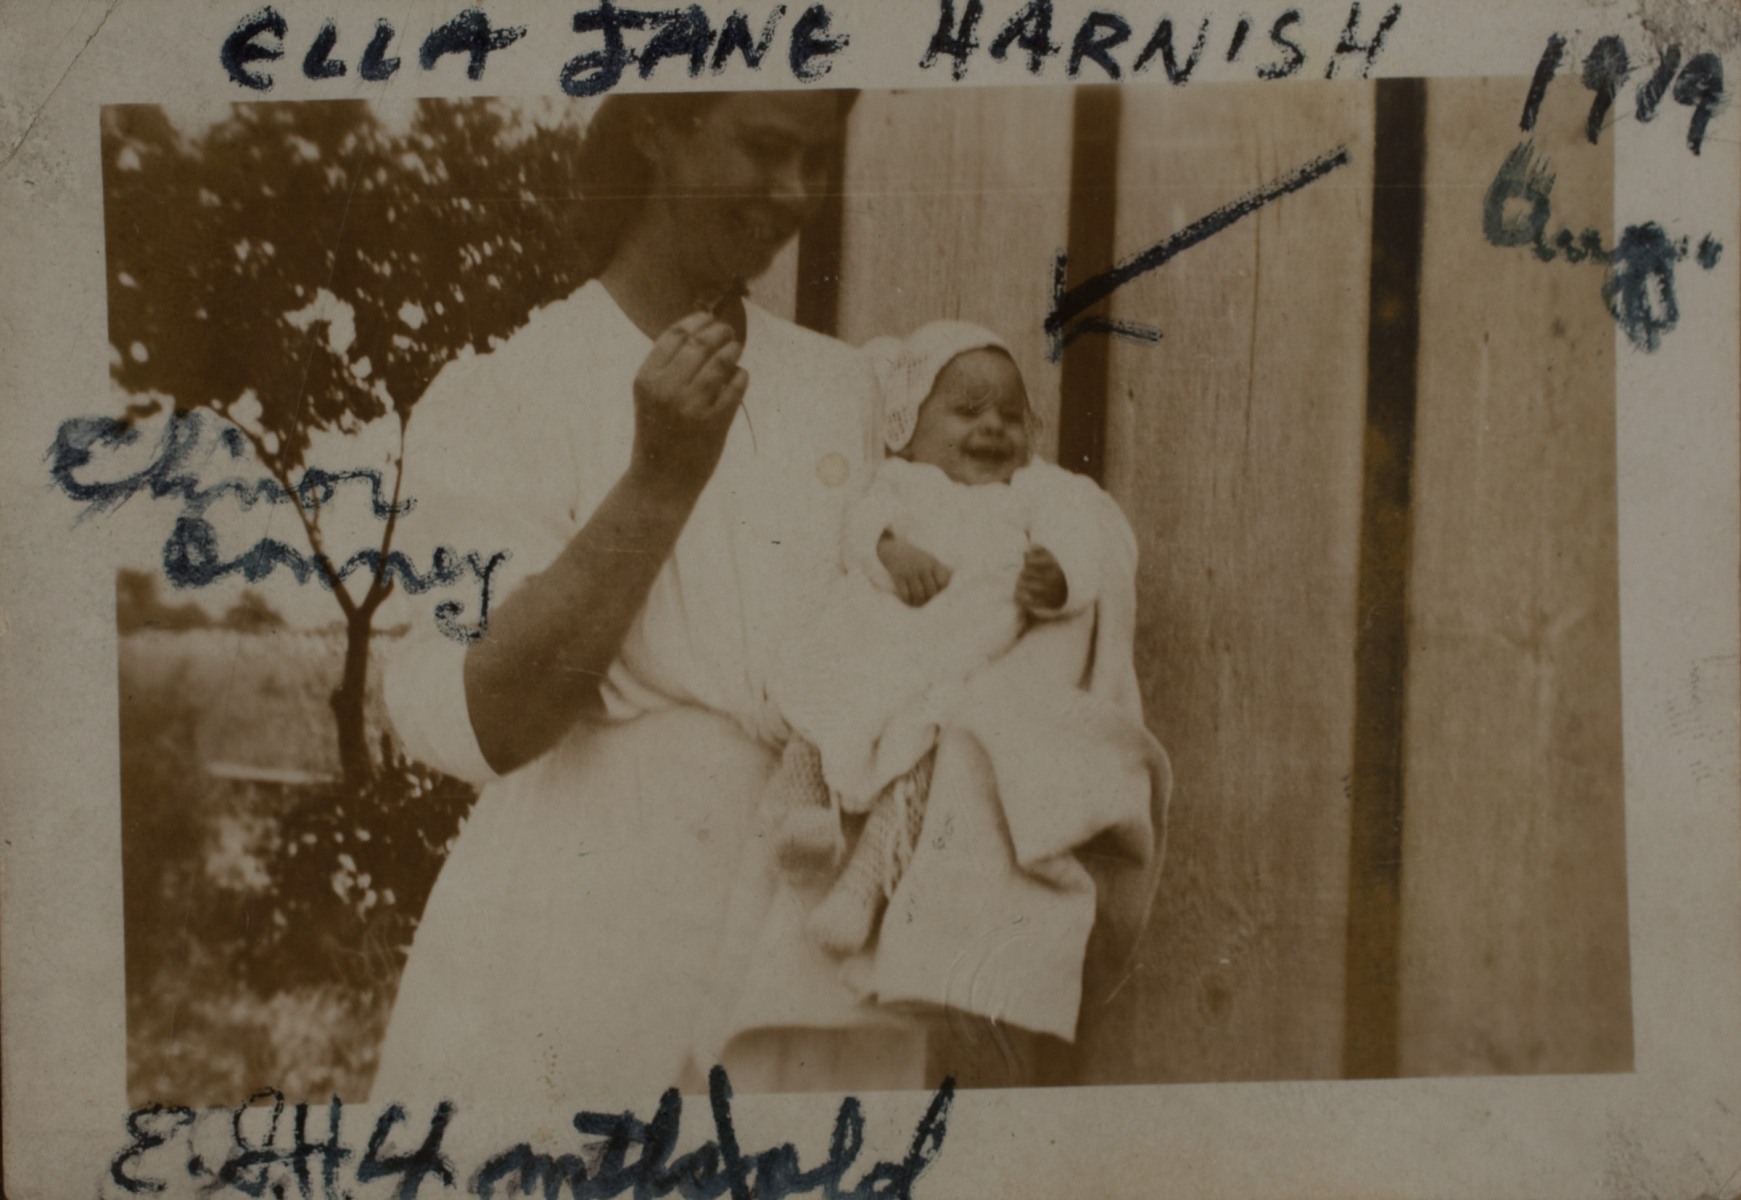 1919 "Ella Jane Harnish 1919 Aug. (held by) Elinor Bonney  E.J.H. 4 mths old " labeled by Nellie Bonney (Harnish) and son John Harnish.